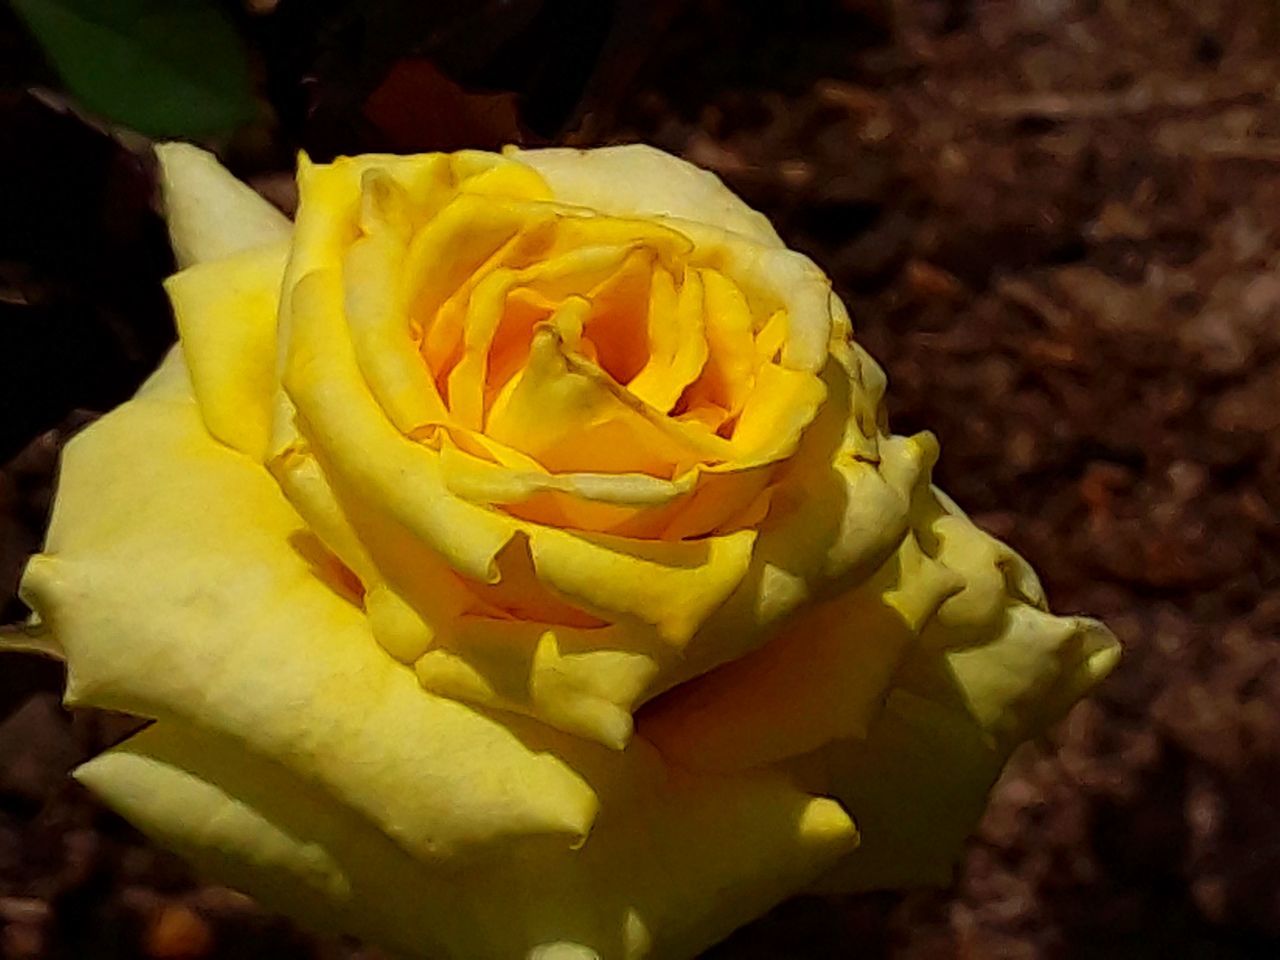 CLOSE-UP OF YELLOW ROSE IN BLOOM